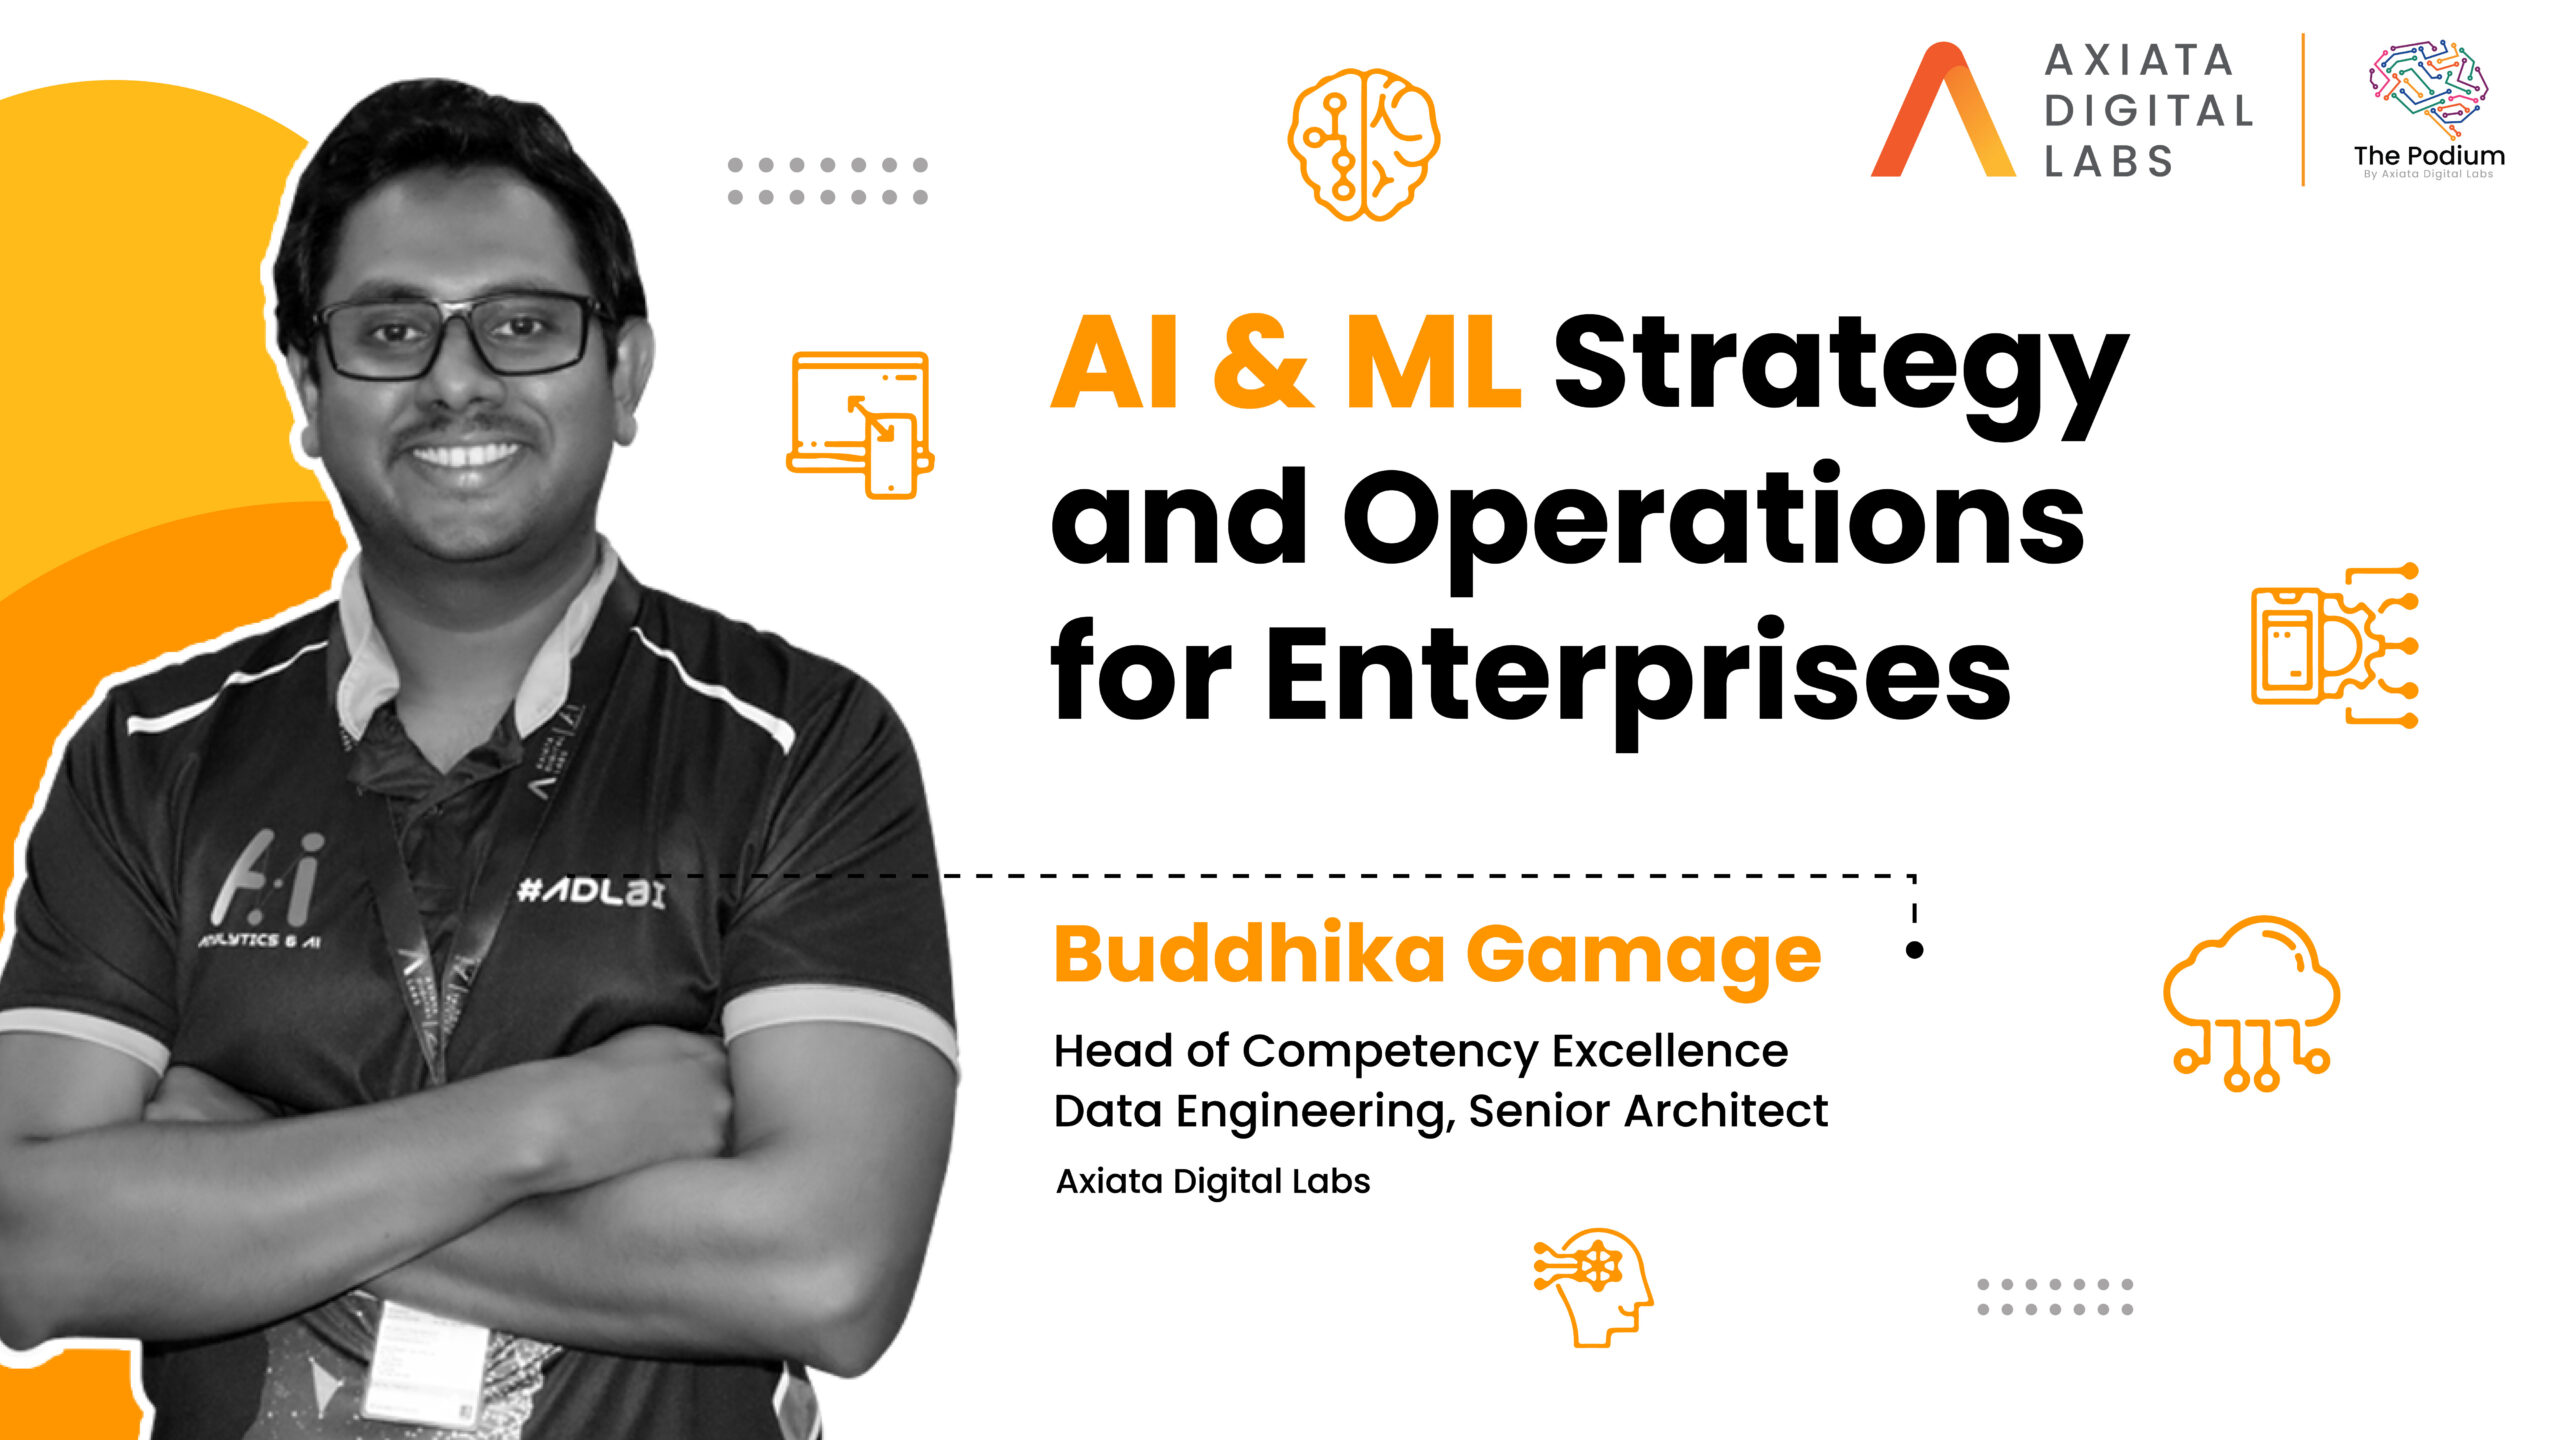 AI & ML Strategy and Operations for Enterprises